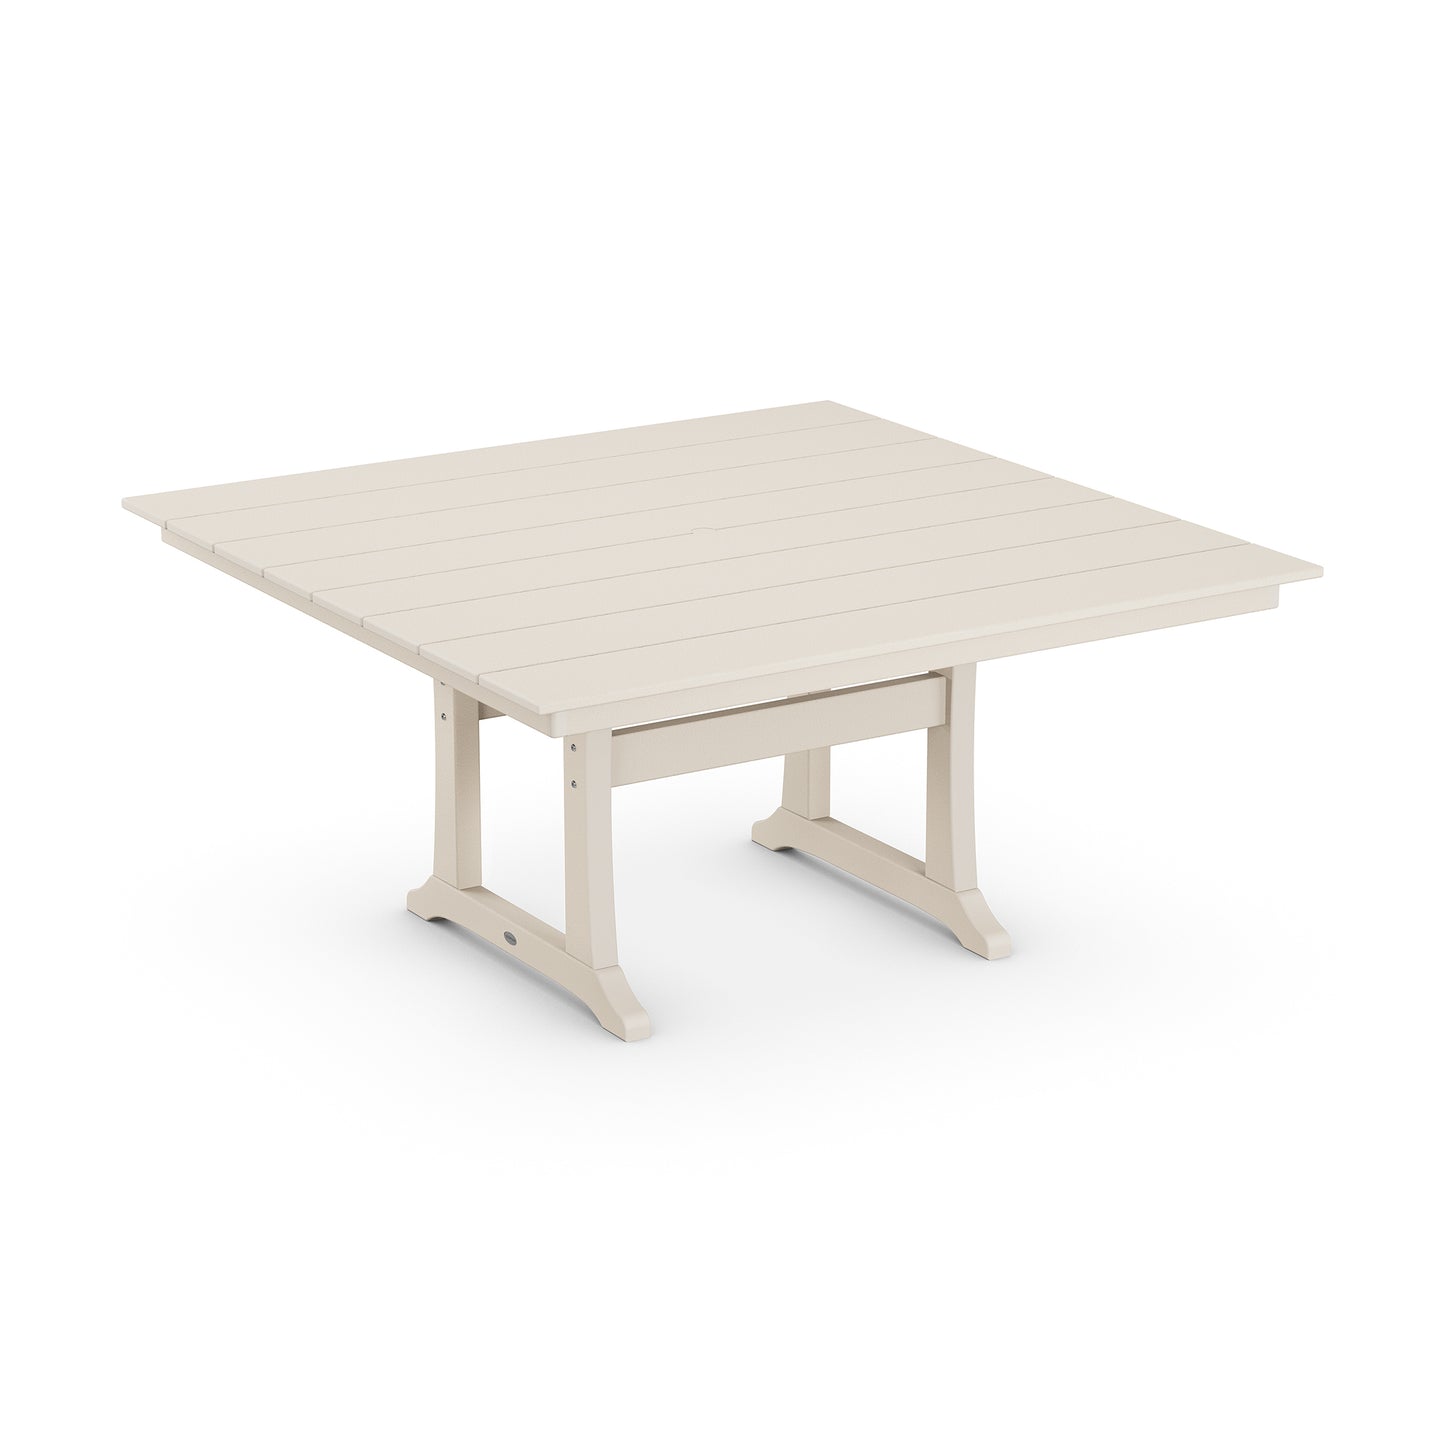 A modern, beige square outdoor POLYWOOD Farmhouse Trestle 59" Dining Table with a simple, sturdy frame and horizontal plank design on the tabletop, isolated on a white background.